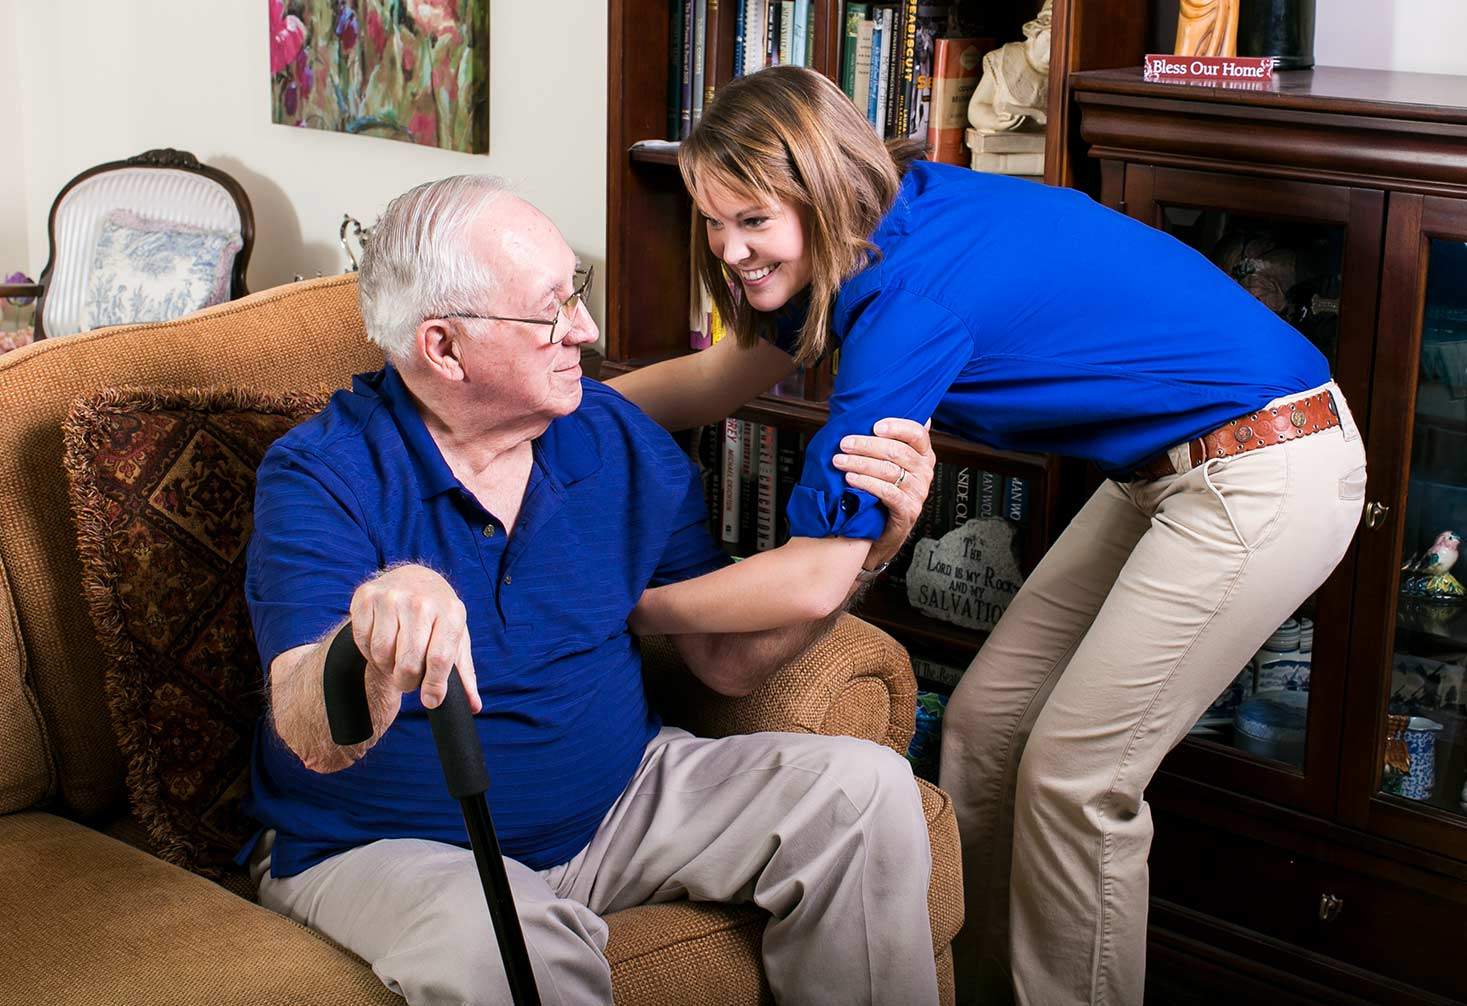 A caregiver supports a client in a chair who is holding a cane